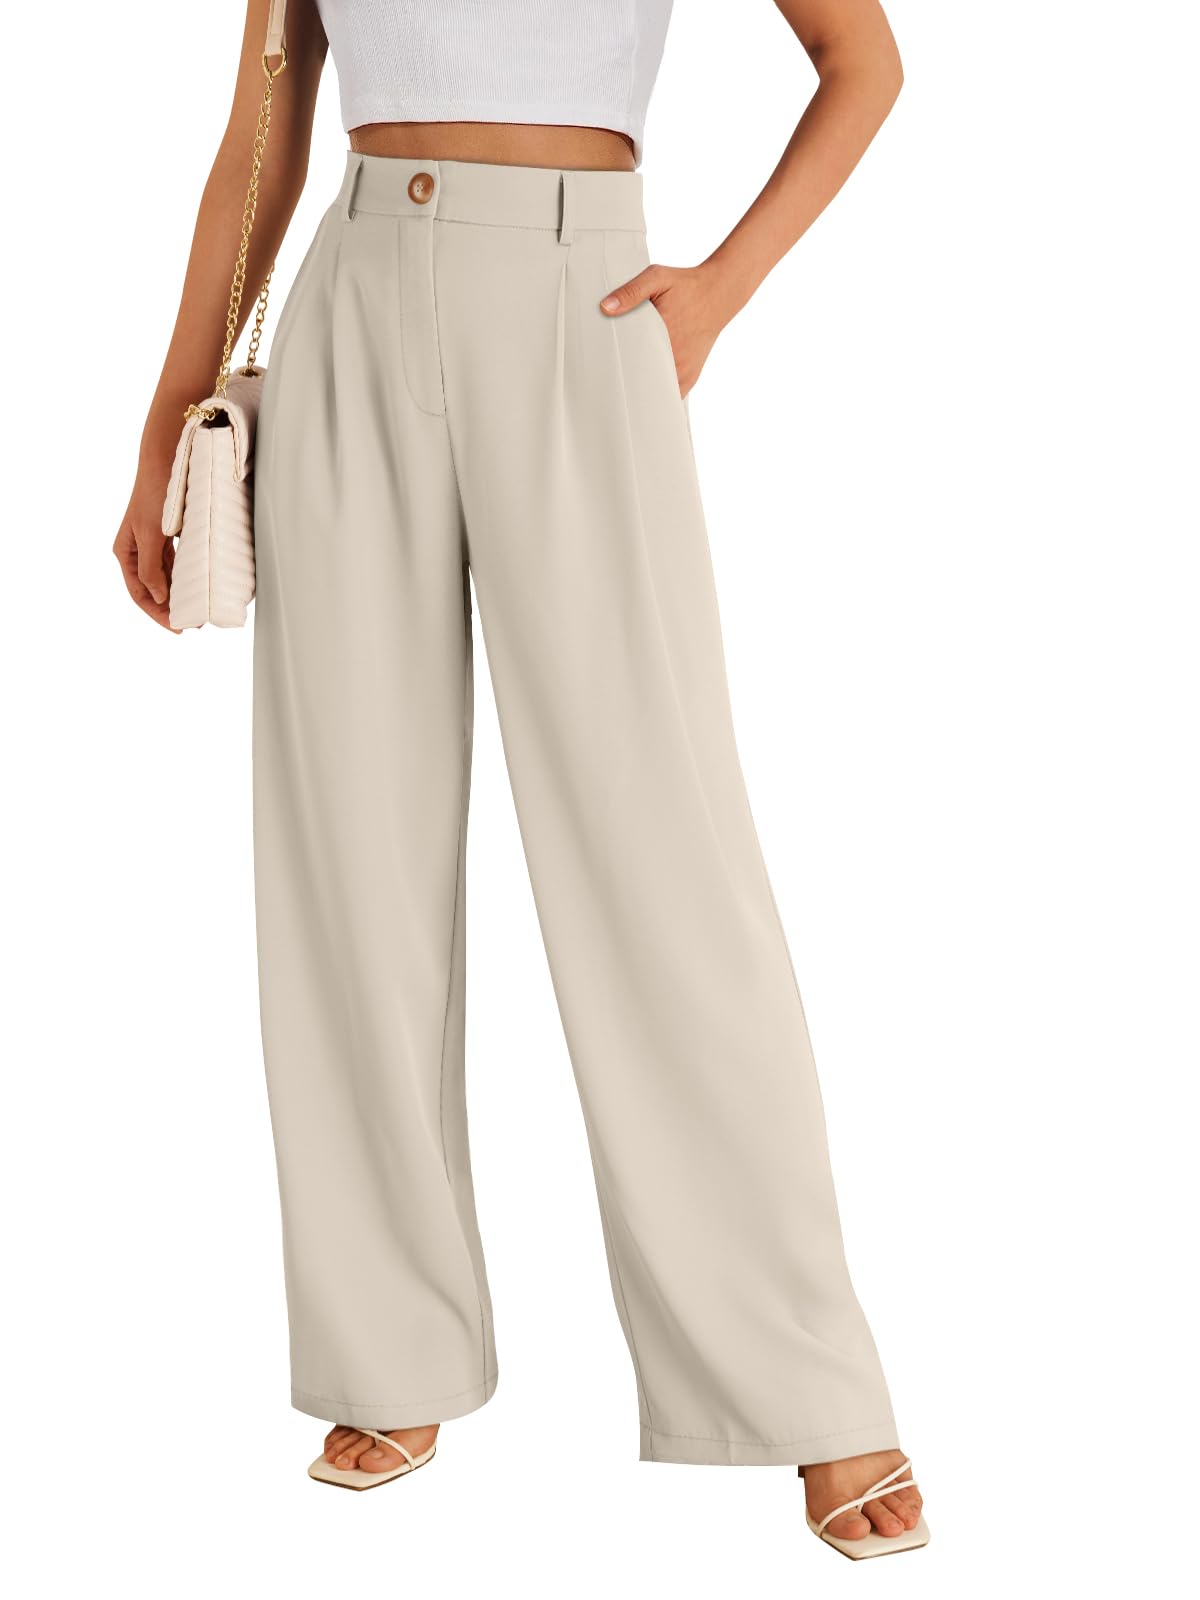 Wide Leg Dress Pants Women's High Waisted Business Casual Trousers VALOZENC White Small 